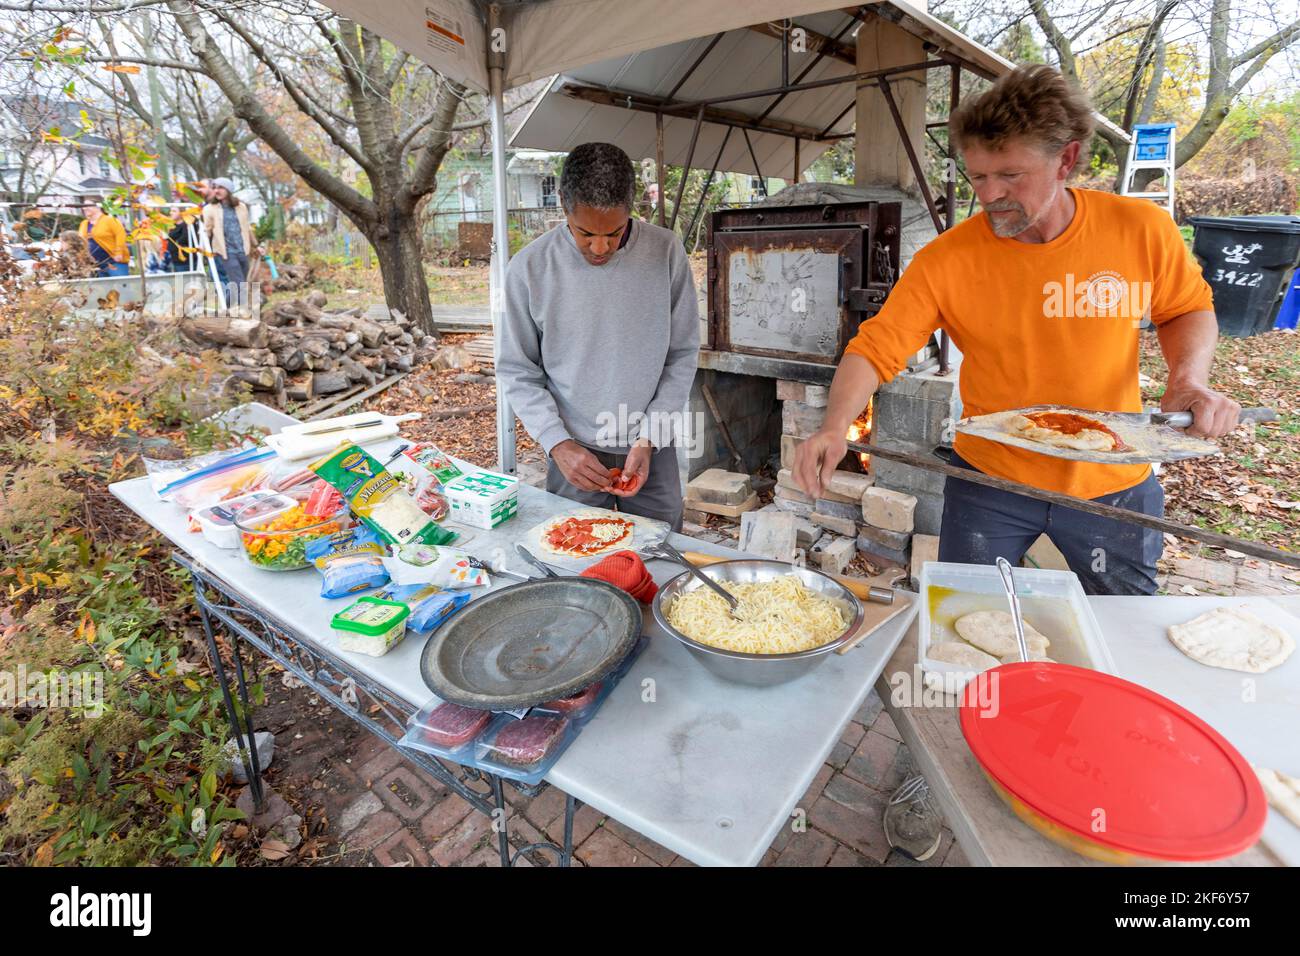 Detroit, Michigan -Two men make pizzas using an outdoor wood-fired oven at a fall festival on the near east side of Detroit. Stock Photo